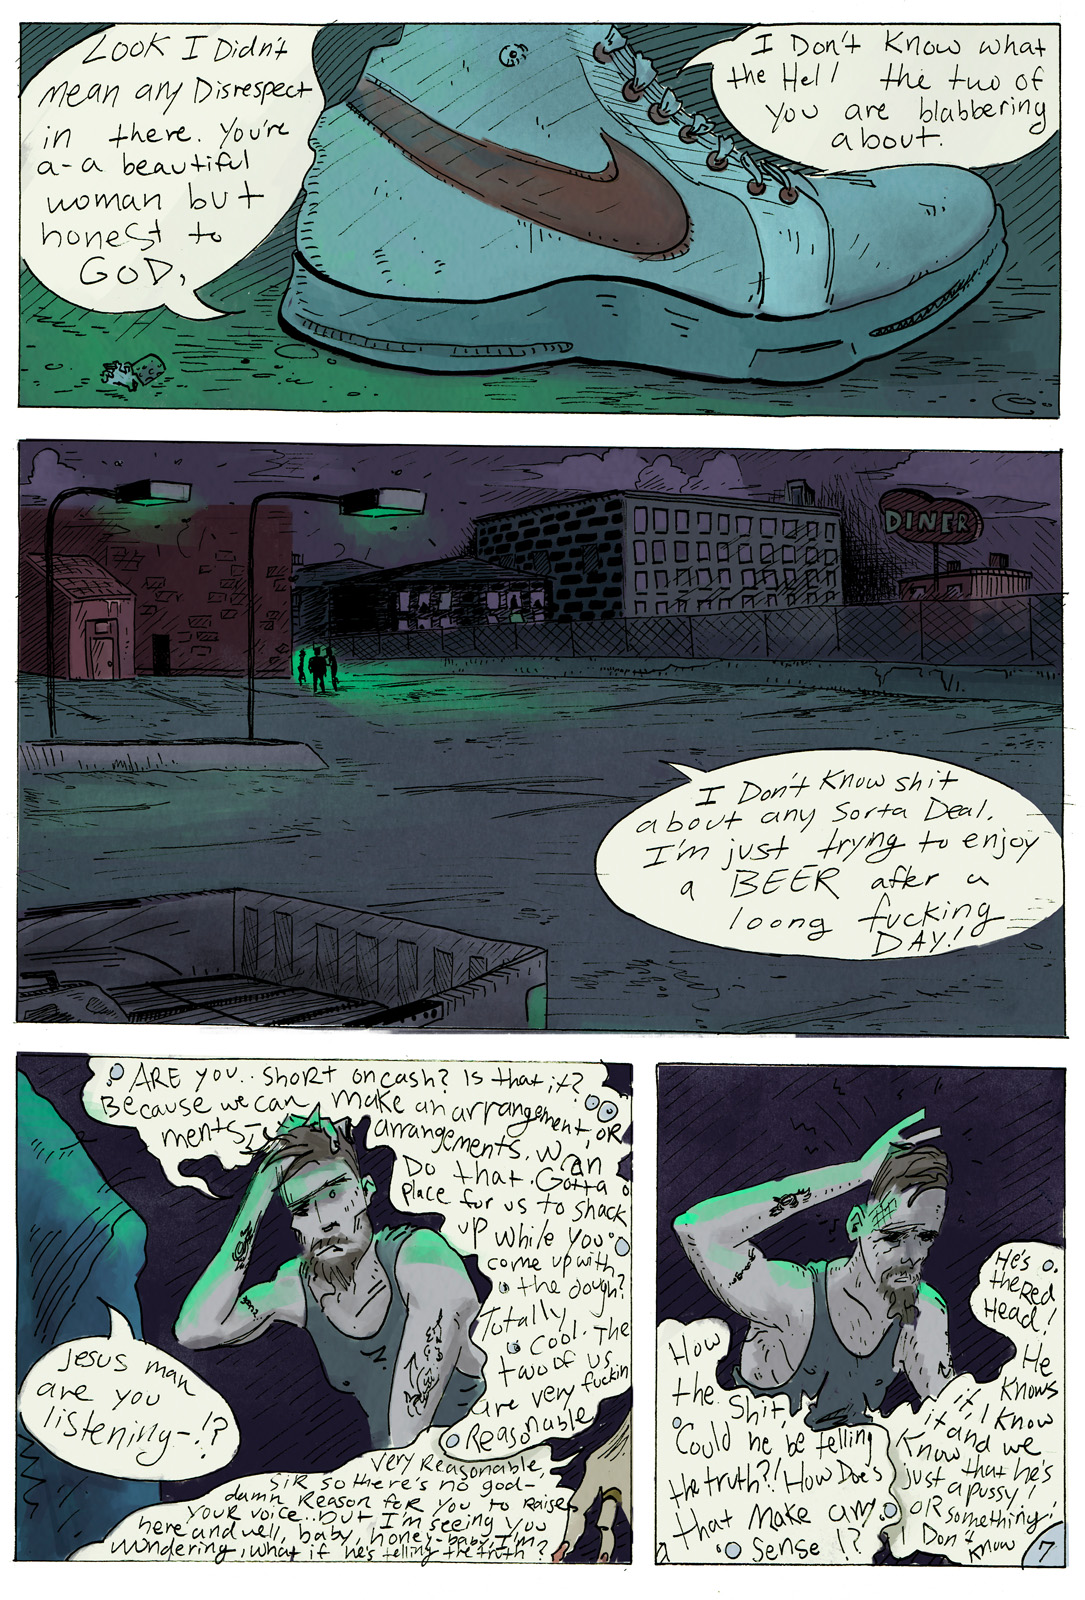 Tales from the Noisy Water, 'Beers, Smokes, and Lipstick', by Luke Fleishman: Page 7